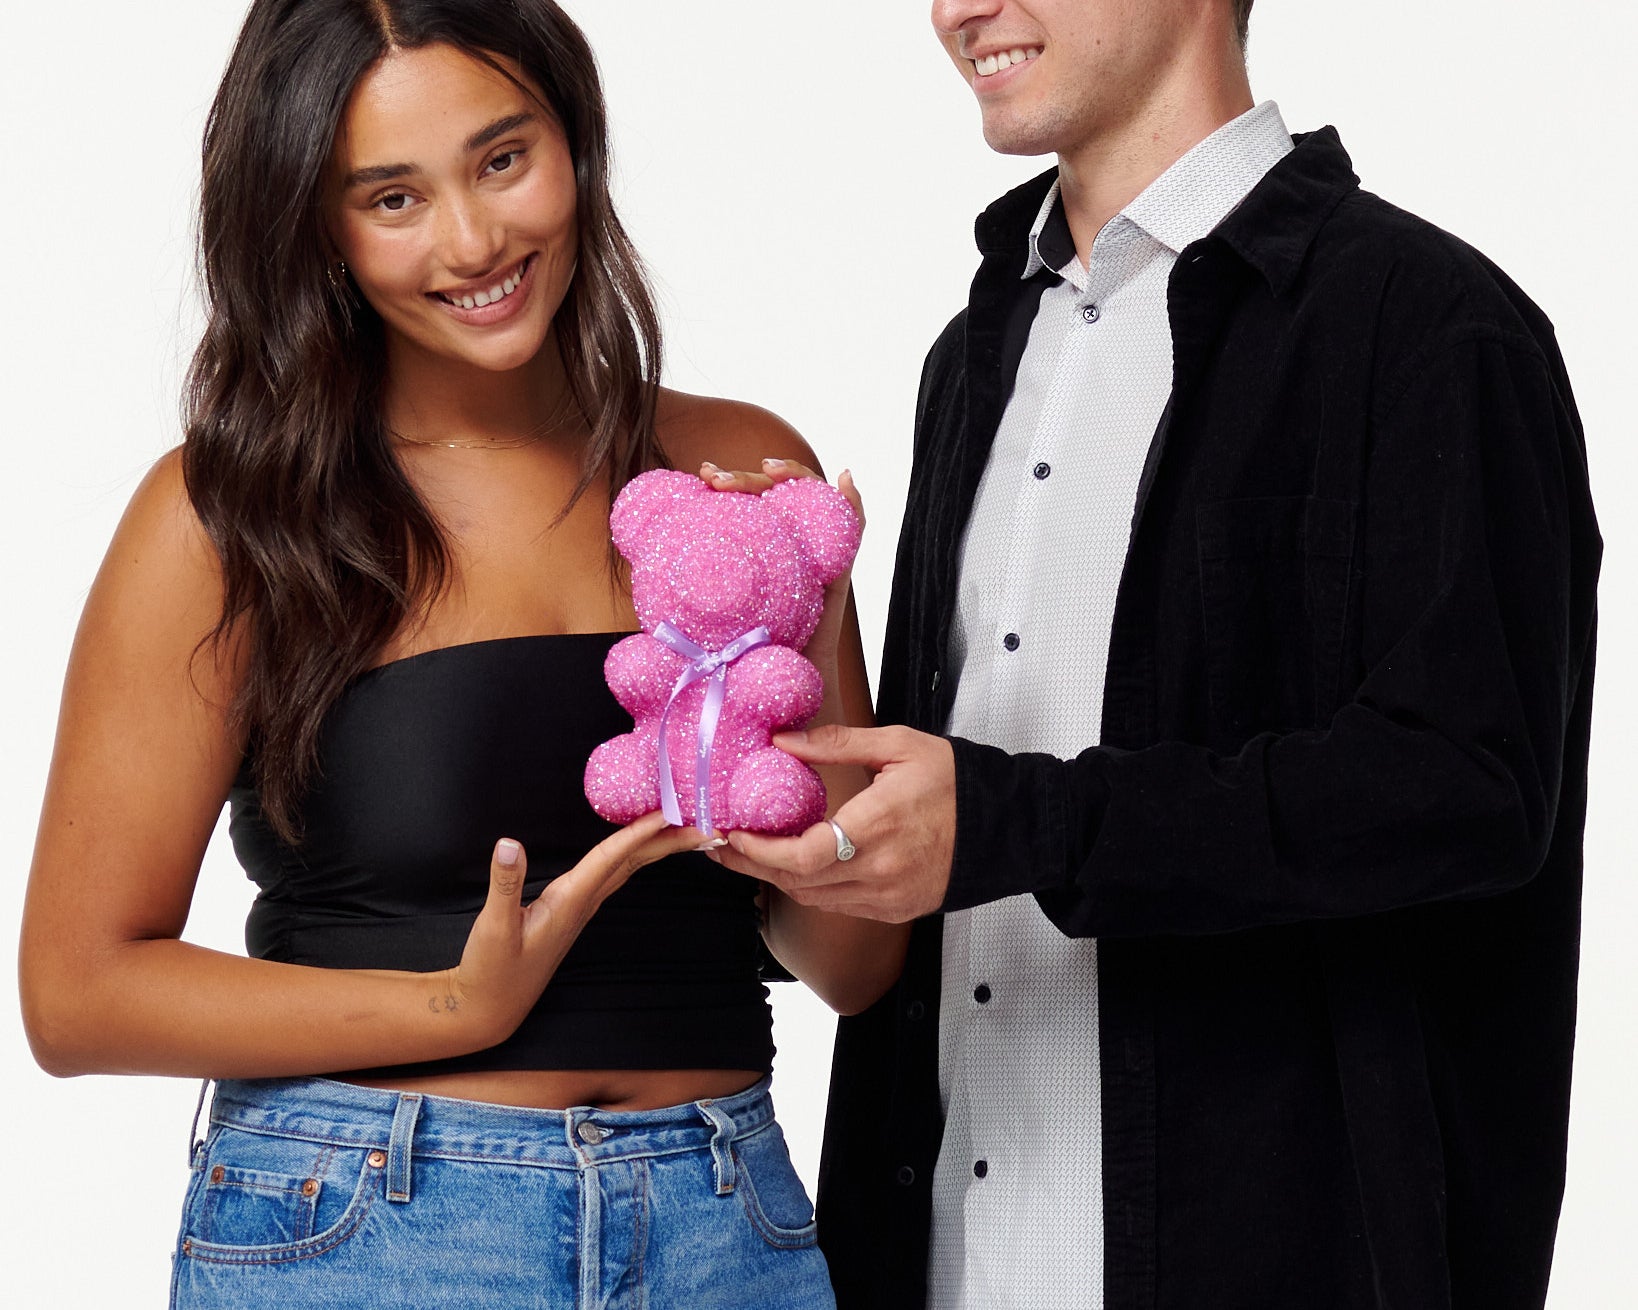 A woman in a black cropped top and blue jeans holds a pink, sparkly teddy bear with an admiring smile. Next to her, a man in a black jacket and white shirt looks at the teddy bear with a pleasant smile, his hand supporting the bear from beneath as they both enjoy the teddy bear's appearance.